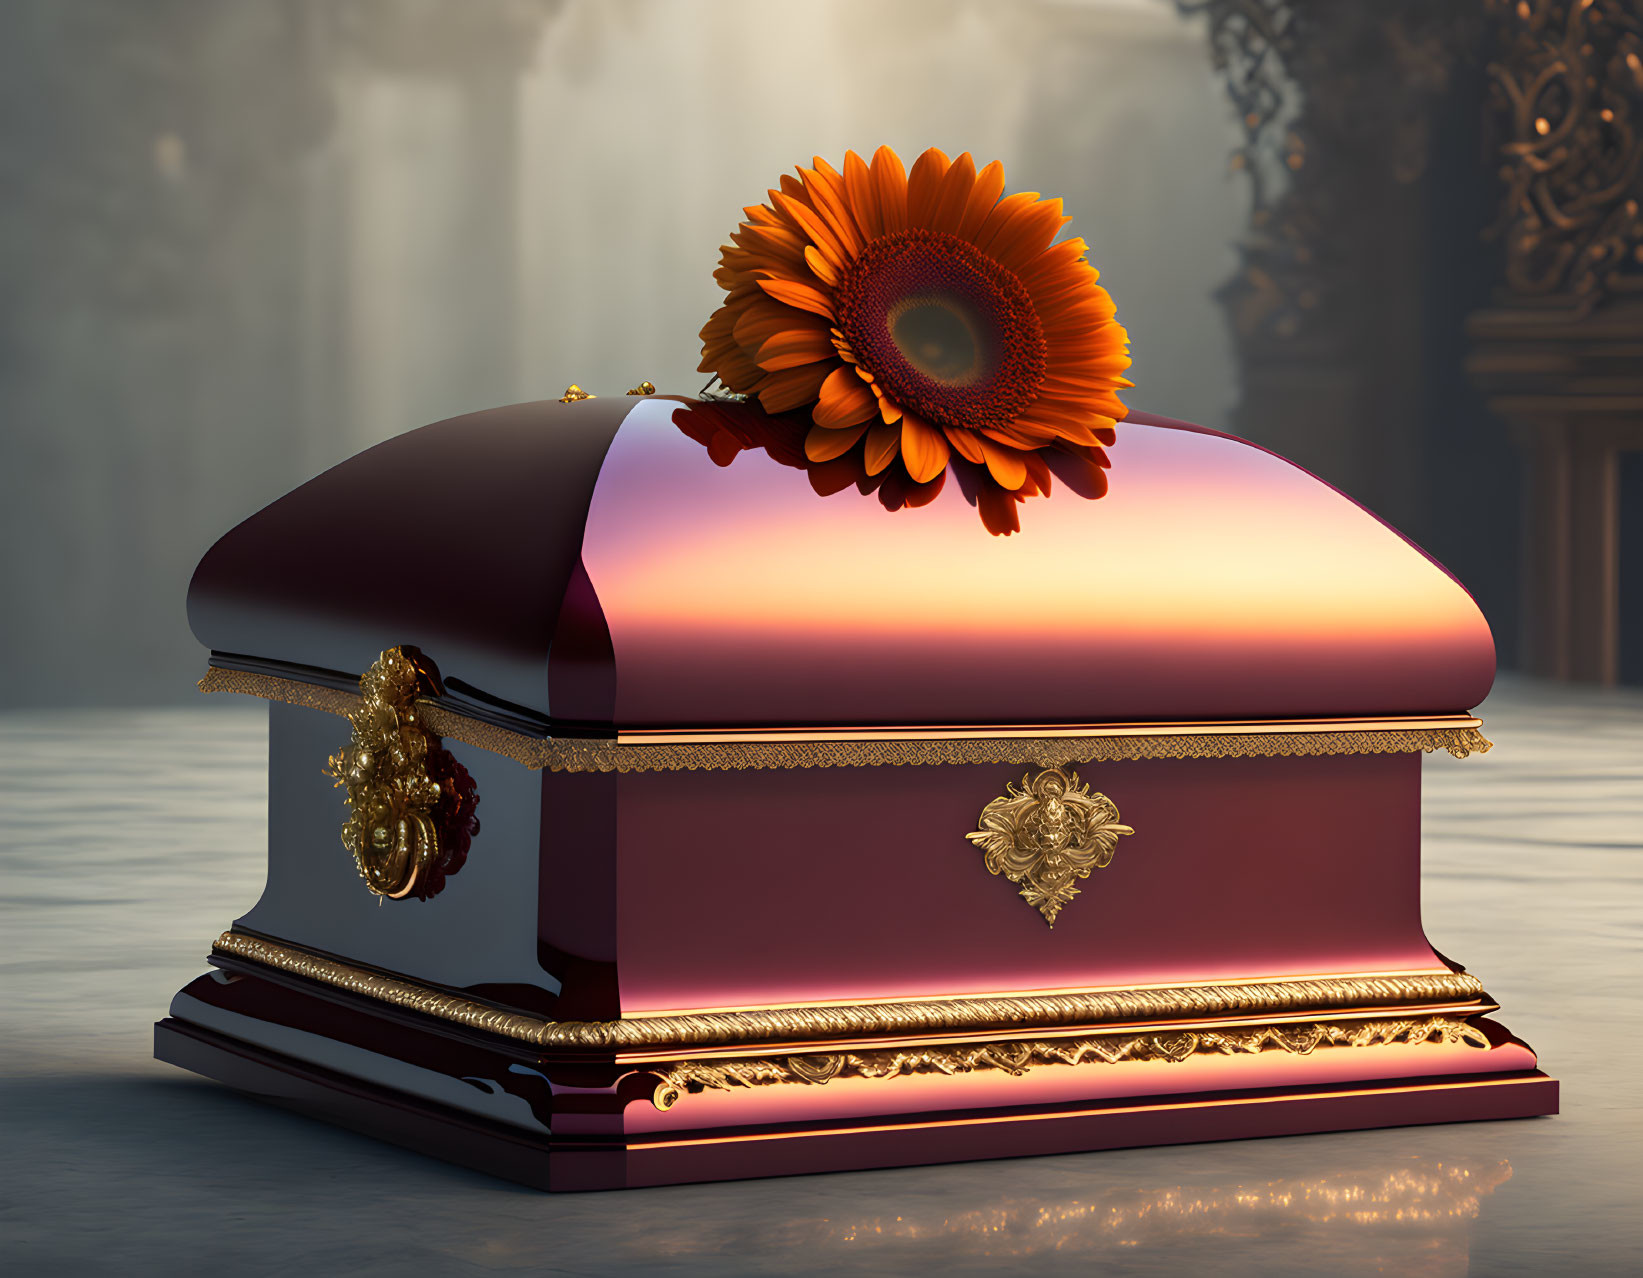 Glossy ornate casket with gold trimmings and orange flower in softly lit room